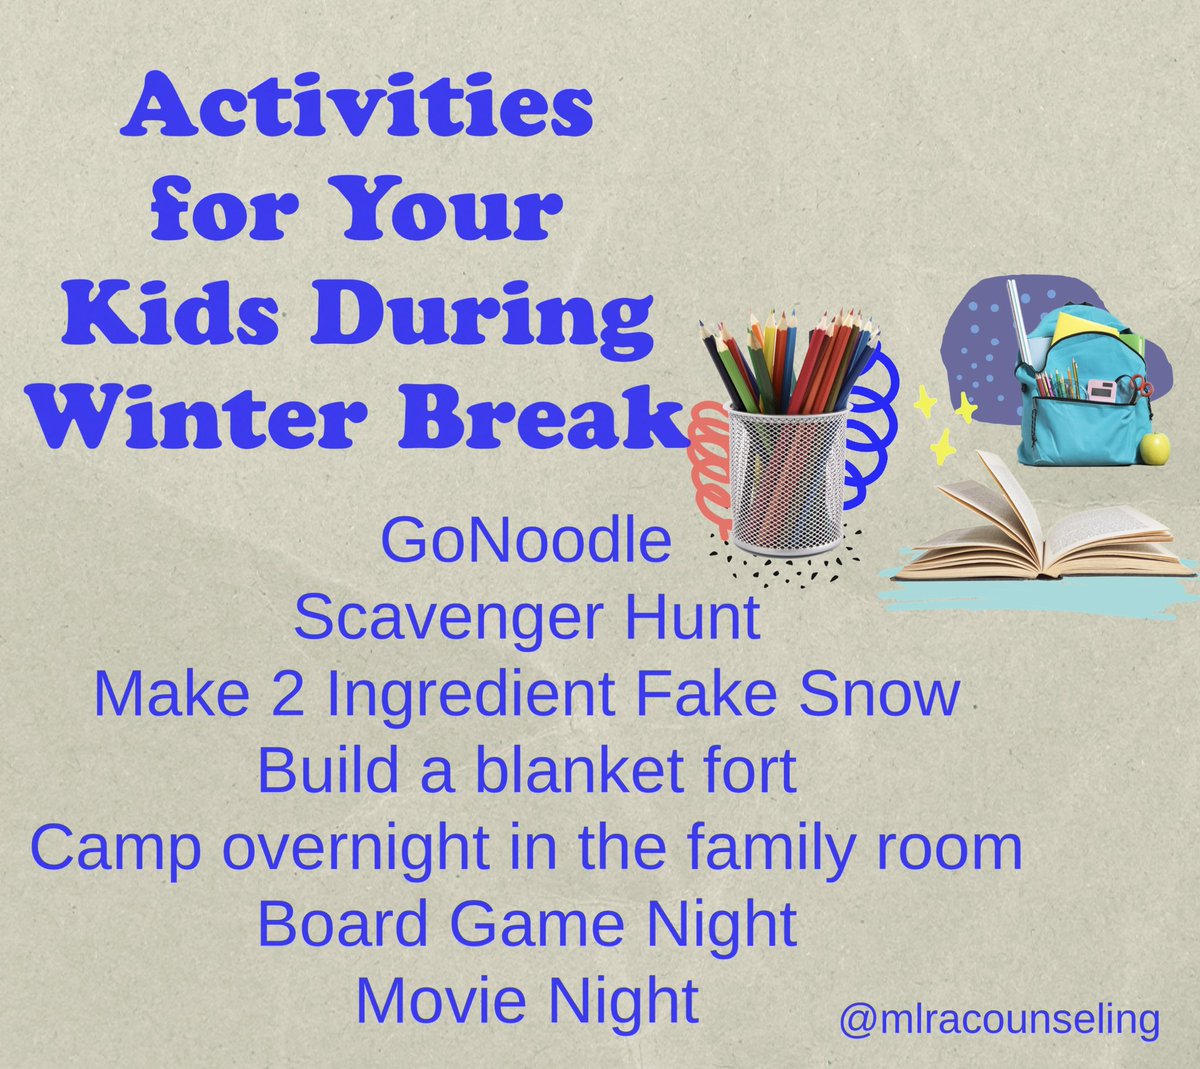 Ideas on family time activities over break?
#counselorshelp #burnbrightnotout #mentalhealthmatters #mentalhealthawareness #tools2thrive #bethe1to #be4stage4 #schaumburg #4mind4body #chicago #lincolnpark 
#mlracounseling #schaumburgcounselor #lincolnparkcounselor